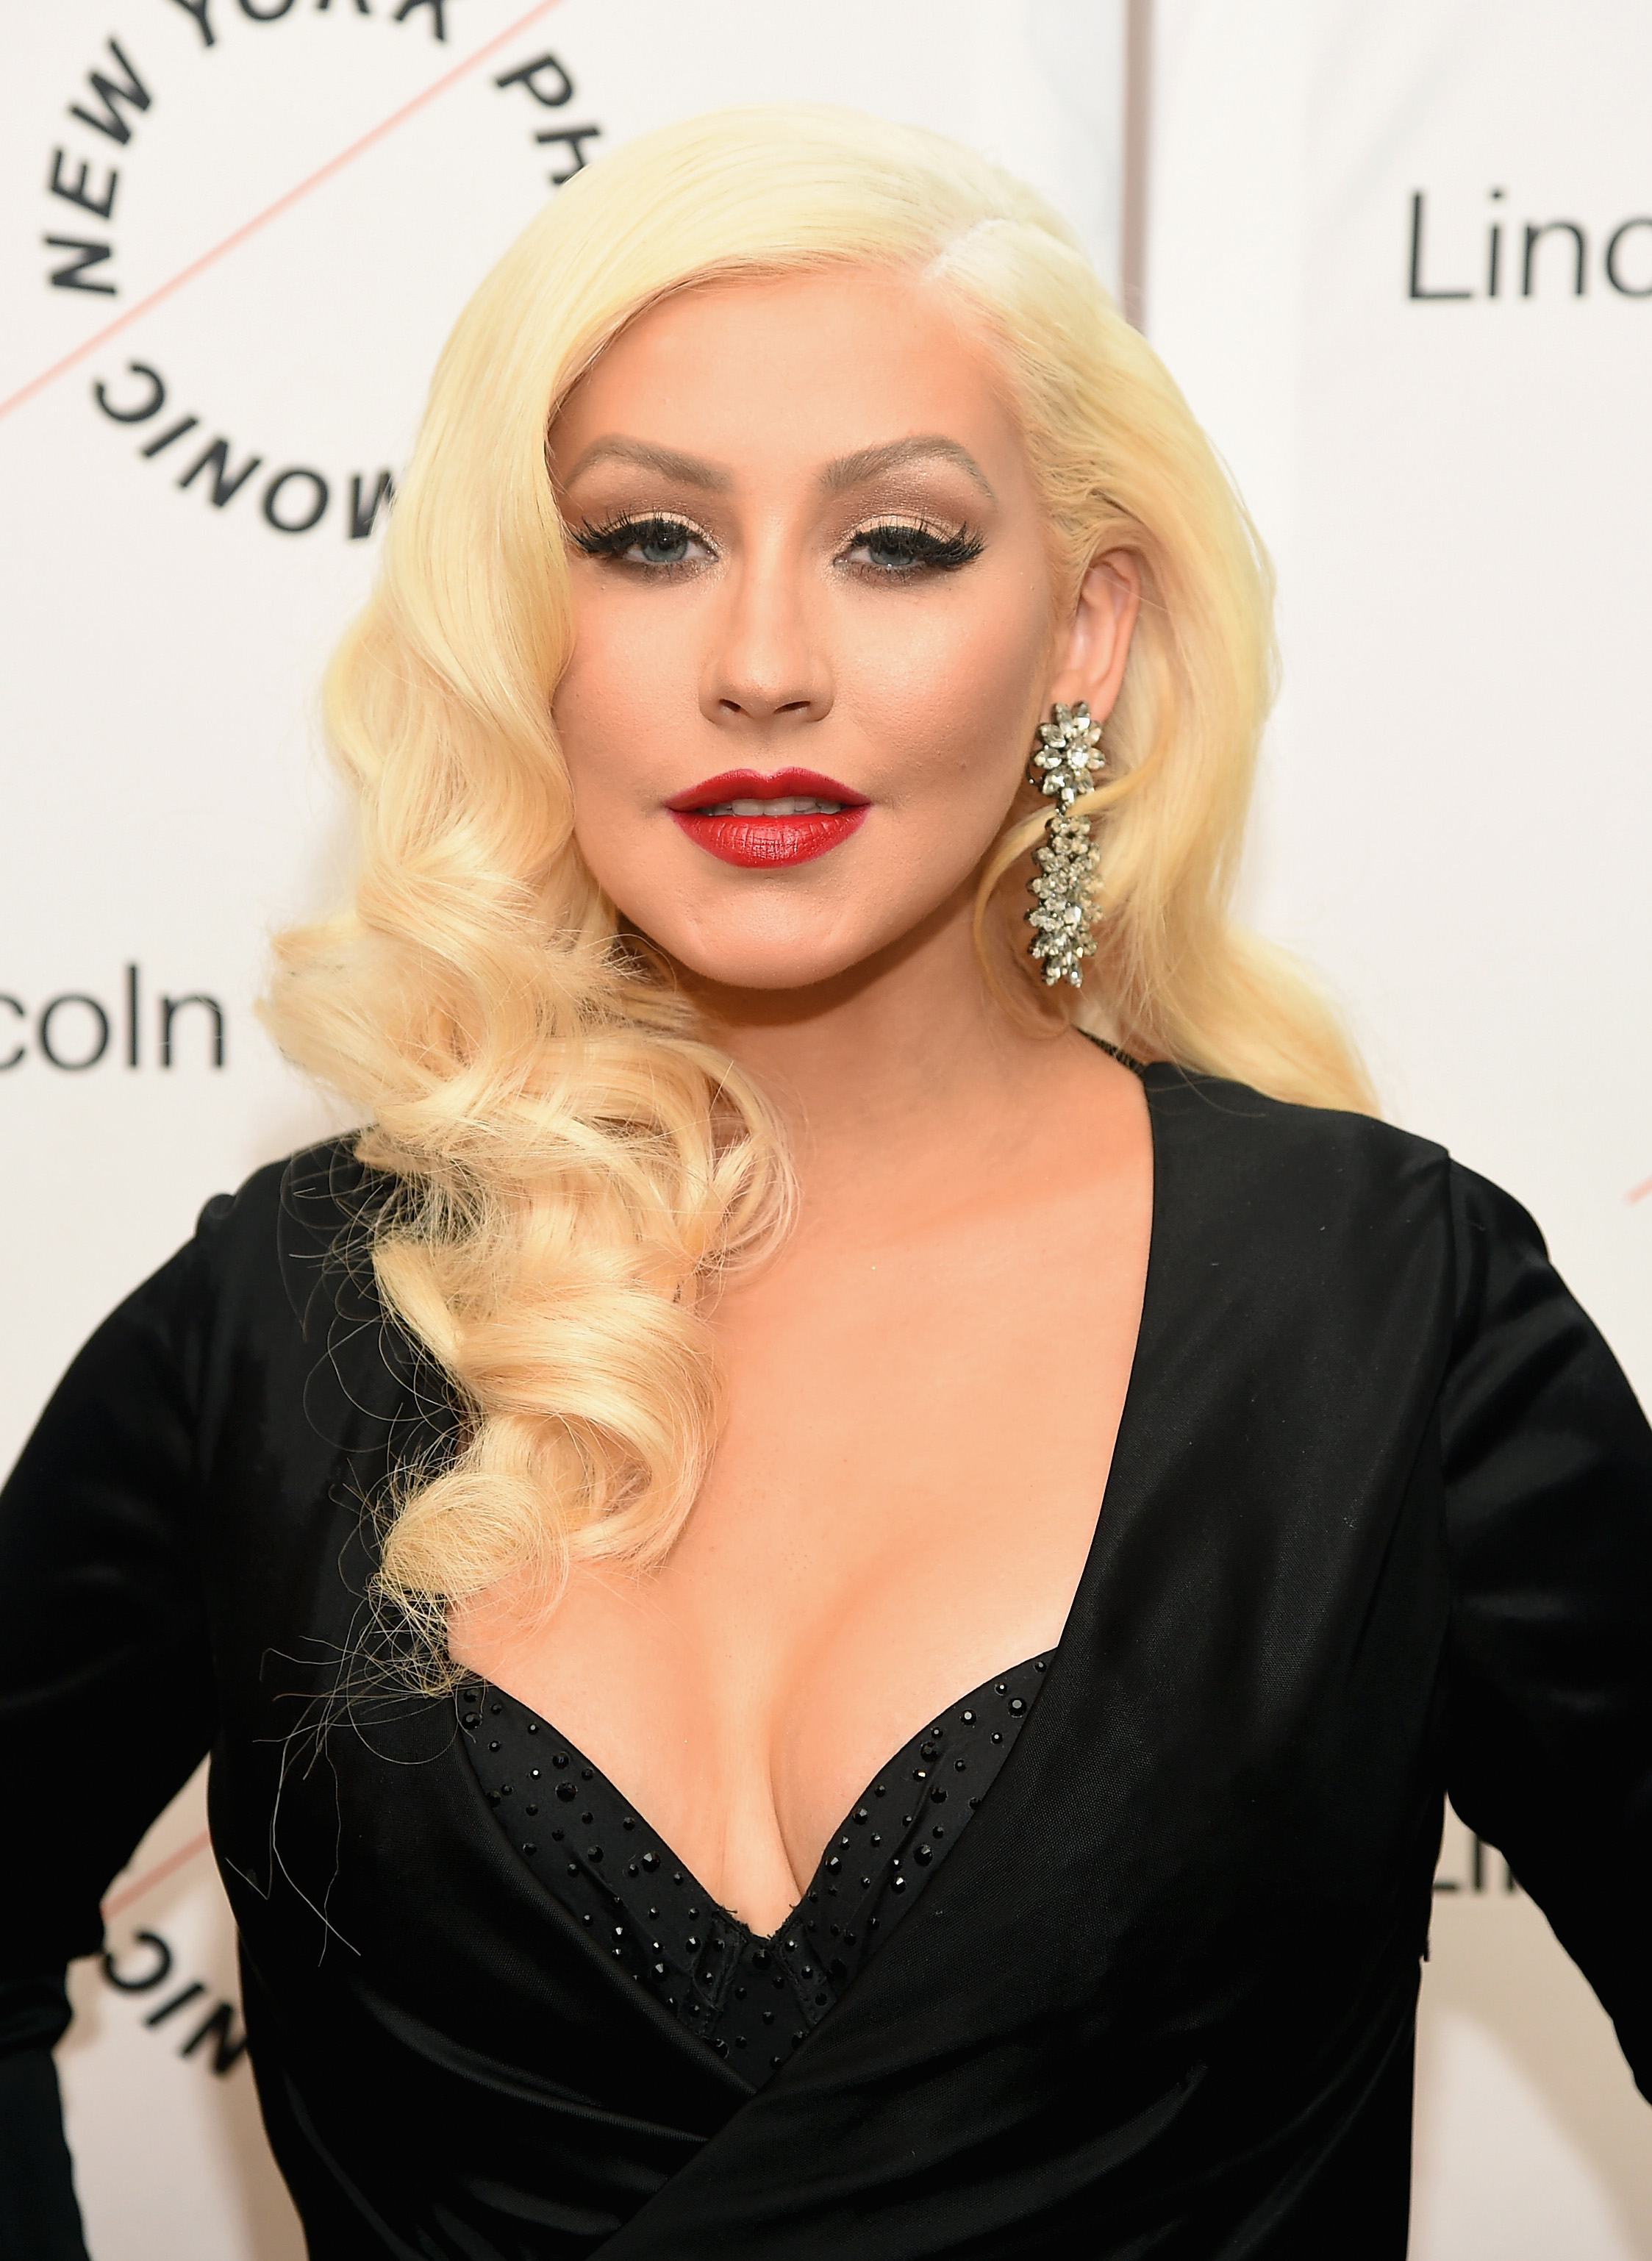 Christina Aguilera S Red Hair Is A Crazy Change For The Typically